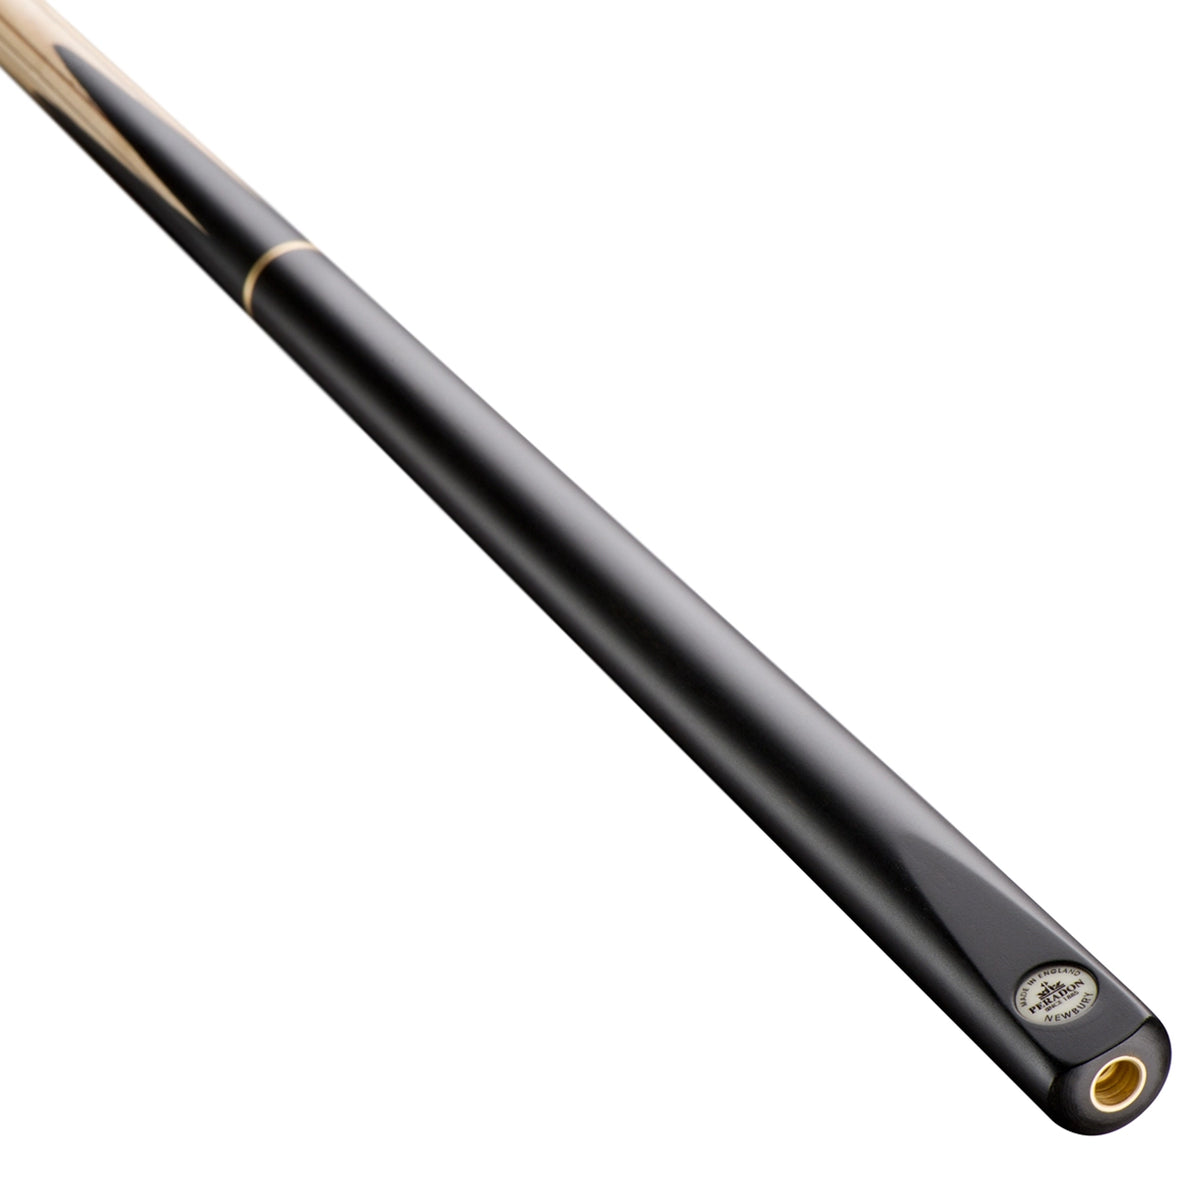 Peradon Newbury 3/4 Jointed Snooker Cue. On angle view